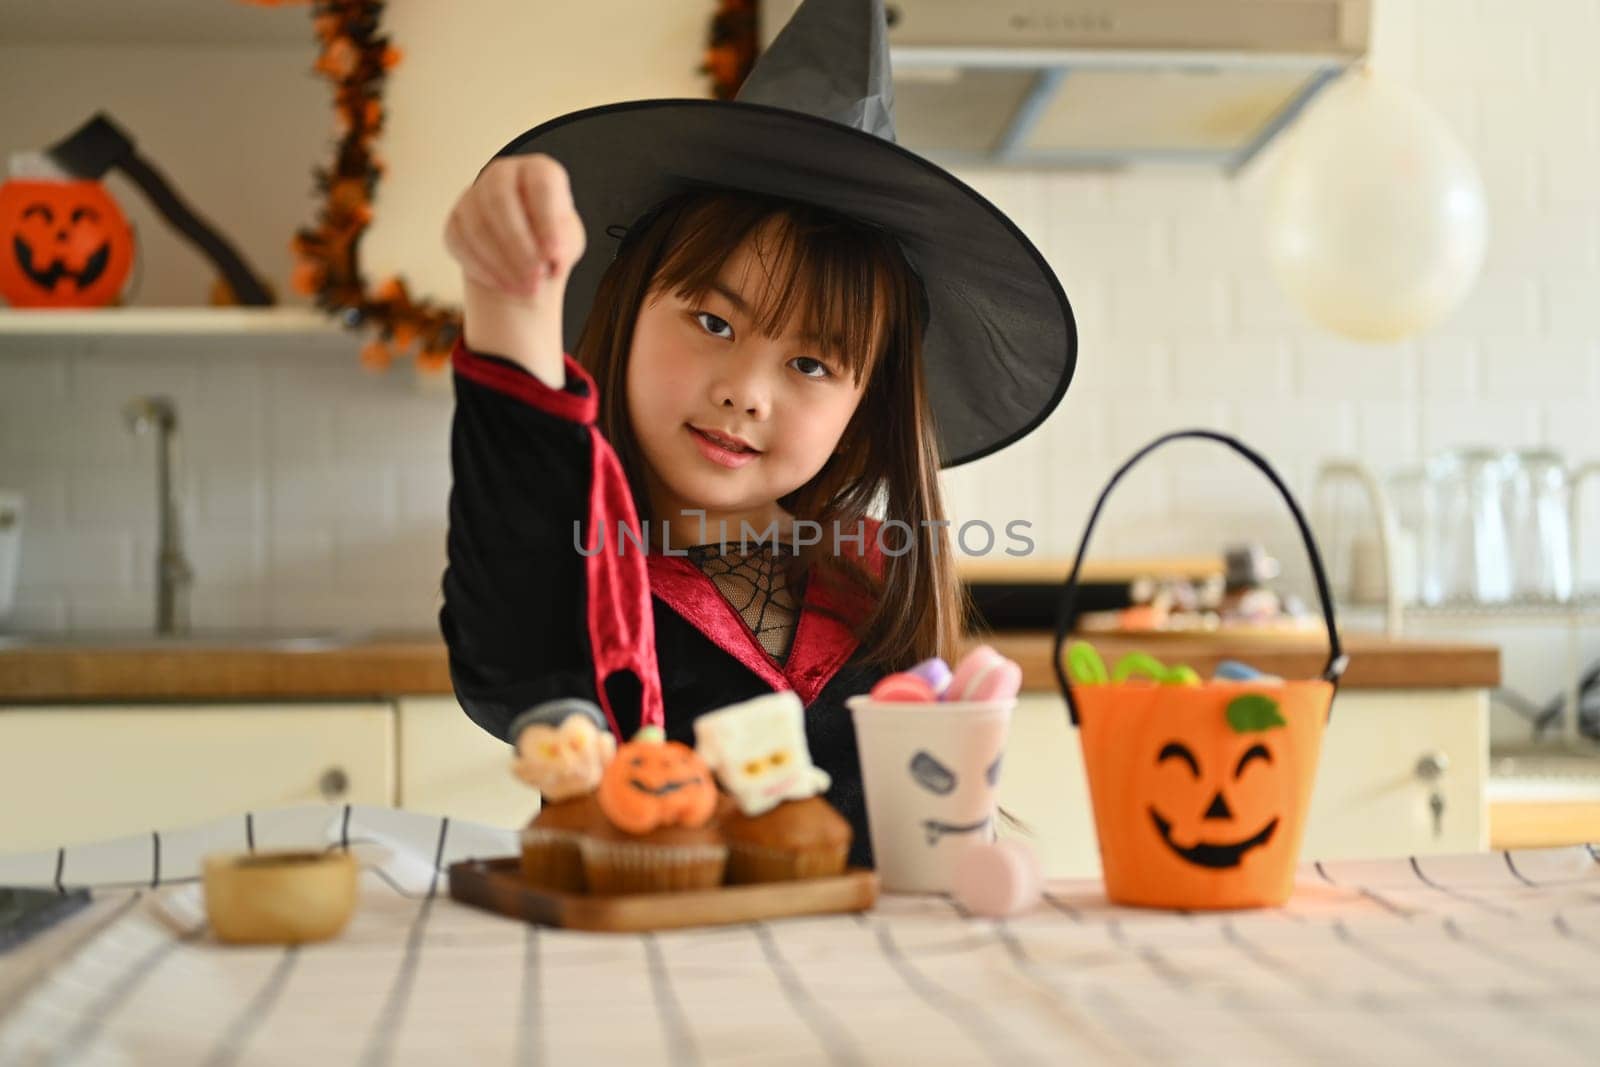 Adorable little girl decorating Halloween cupcakes with different monsters, pumpkins and ghosts by prathanchorruangsak